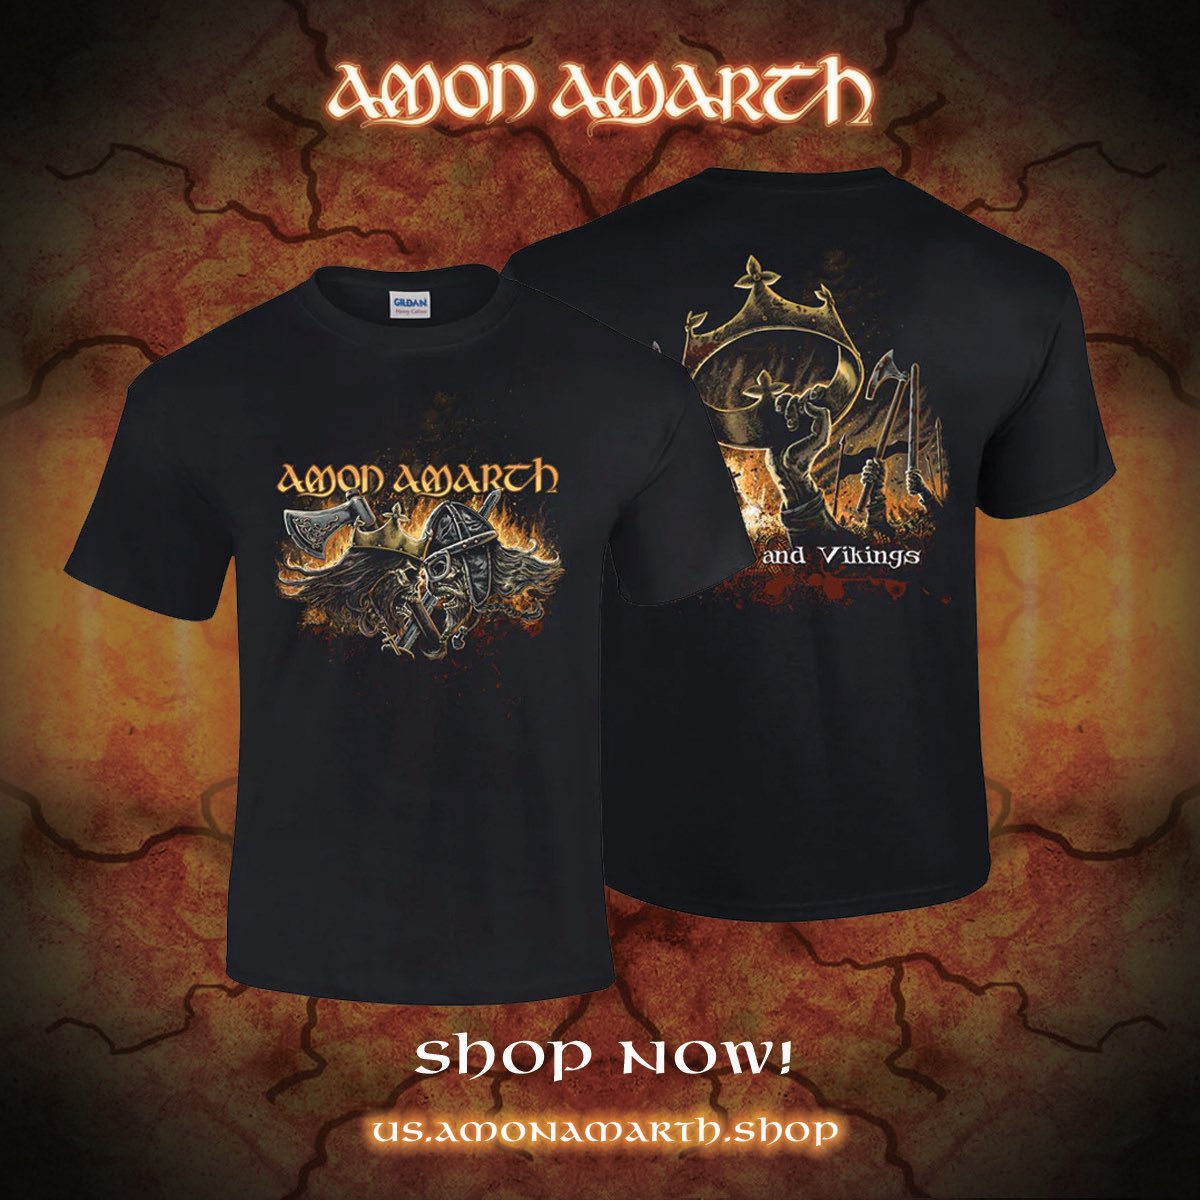 Forged in the fires of the gods! Get new Amon Amarth tees now including “Saxons and Vikings” and more at amonamarth.shop (Europe & US)